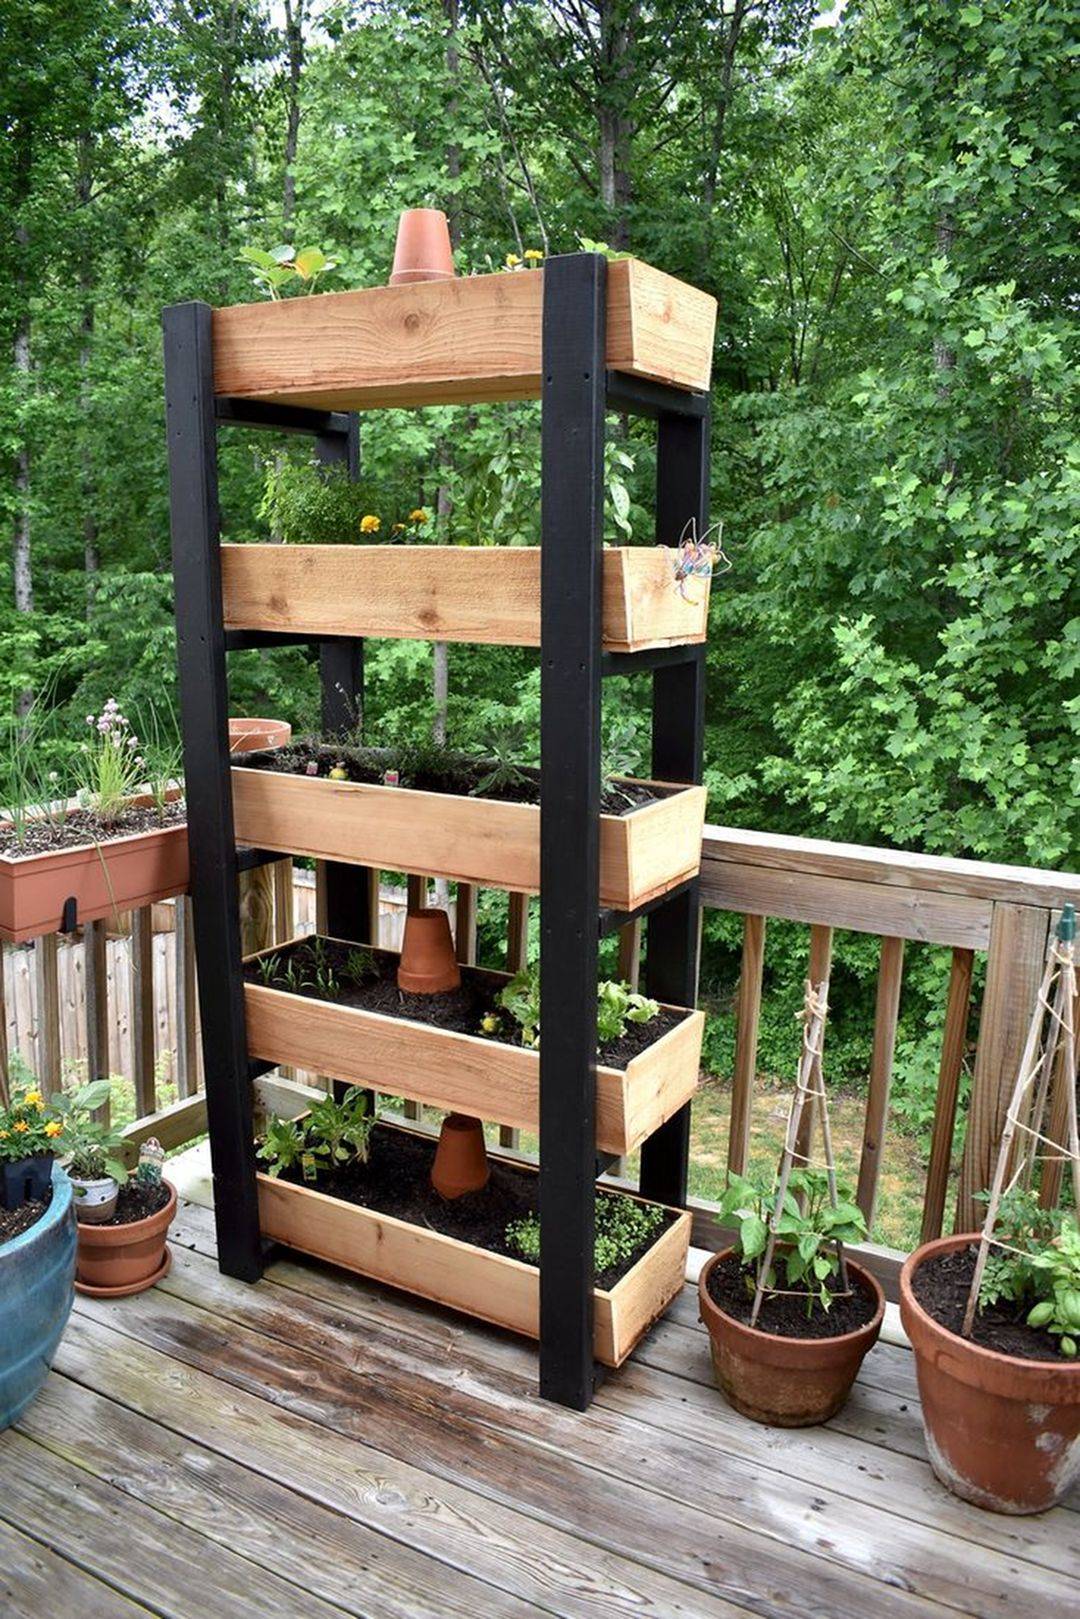 An Awesome Vertical Gardening System